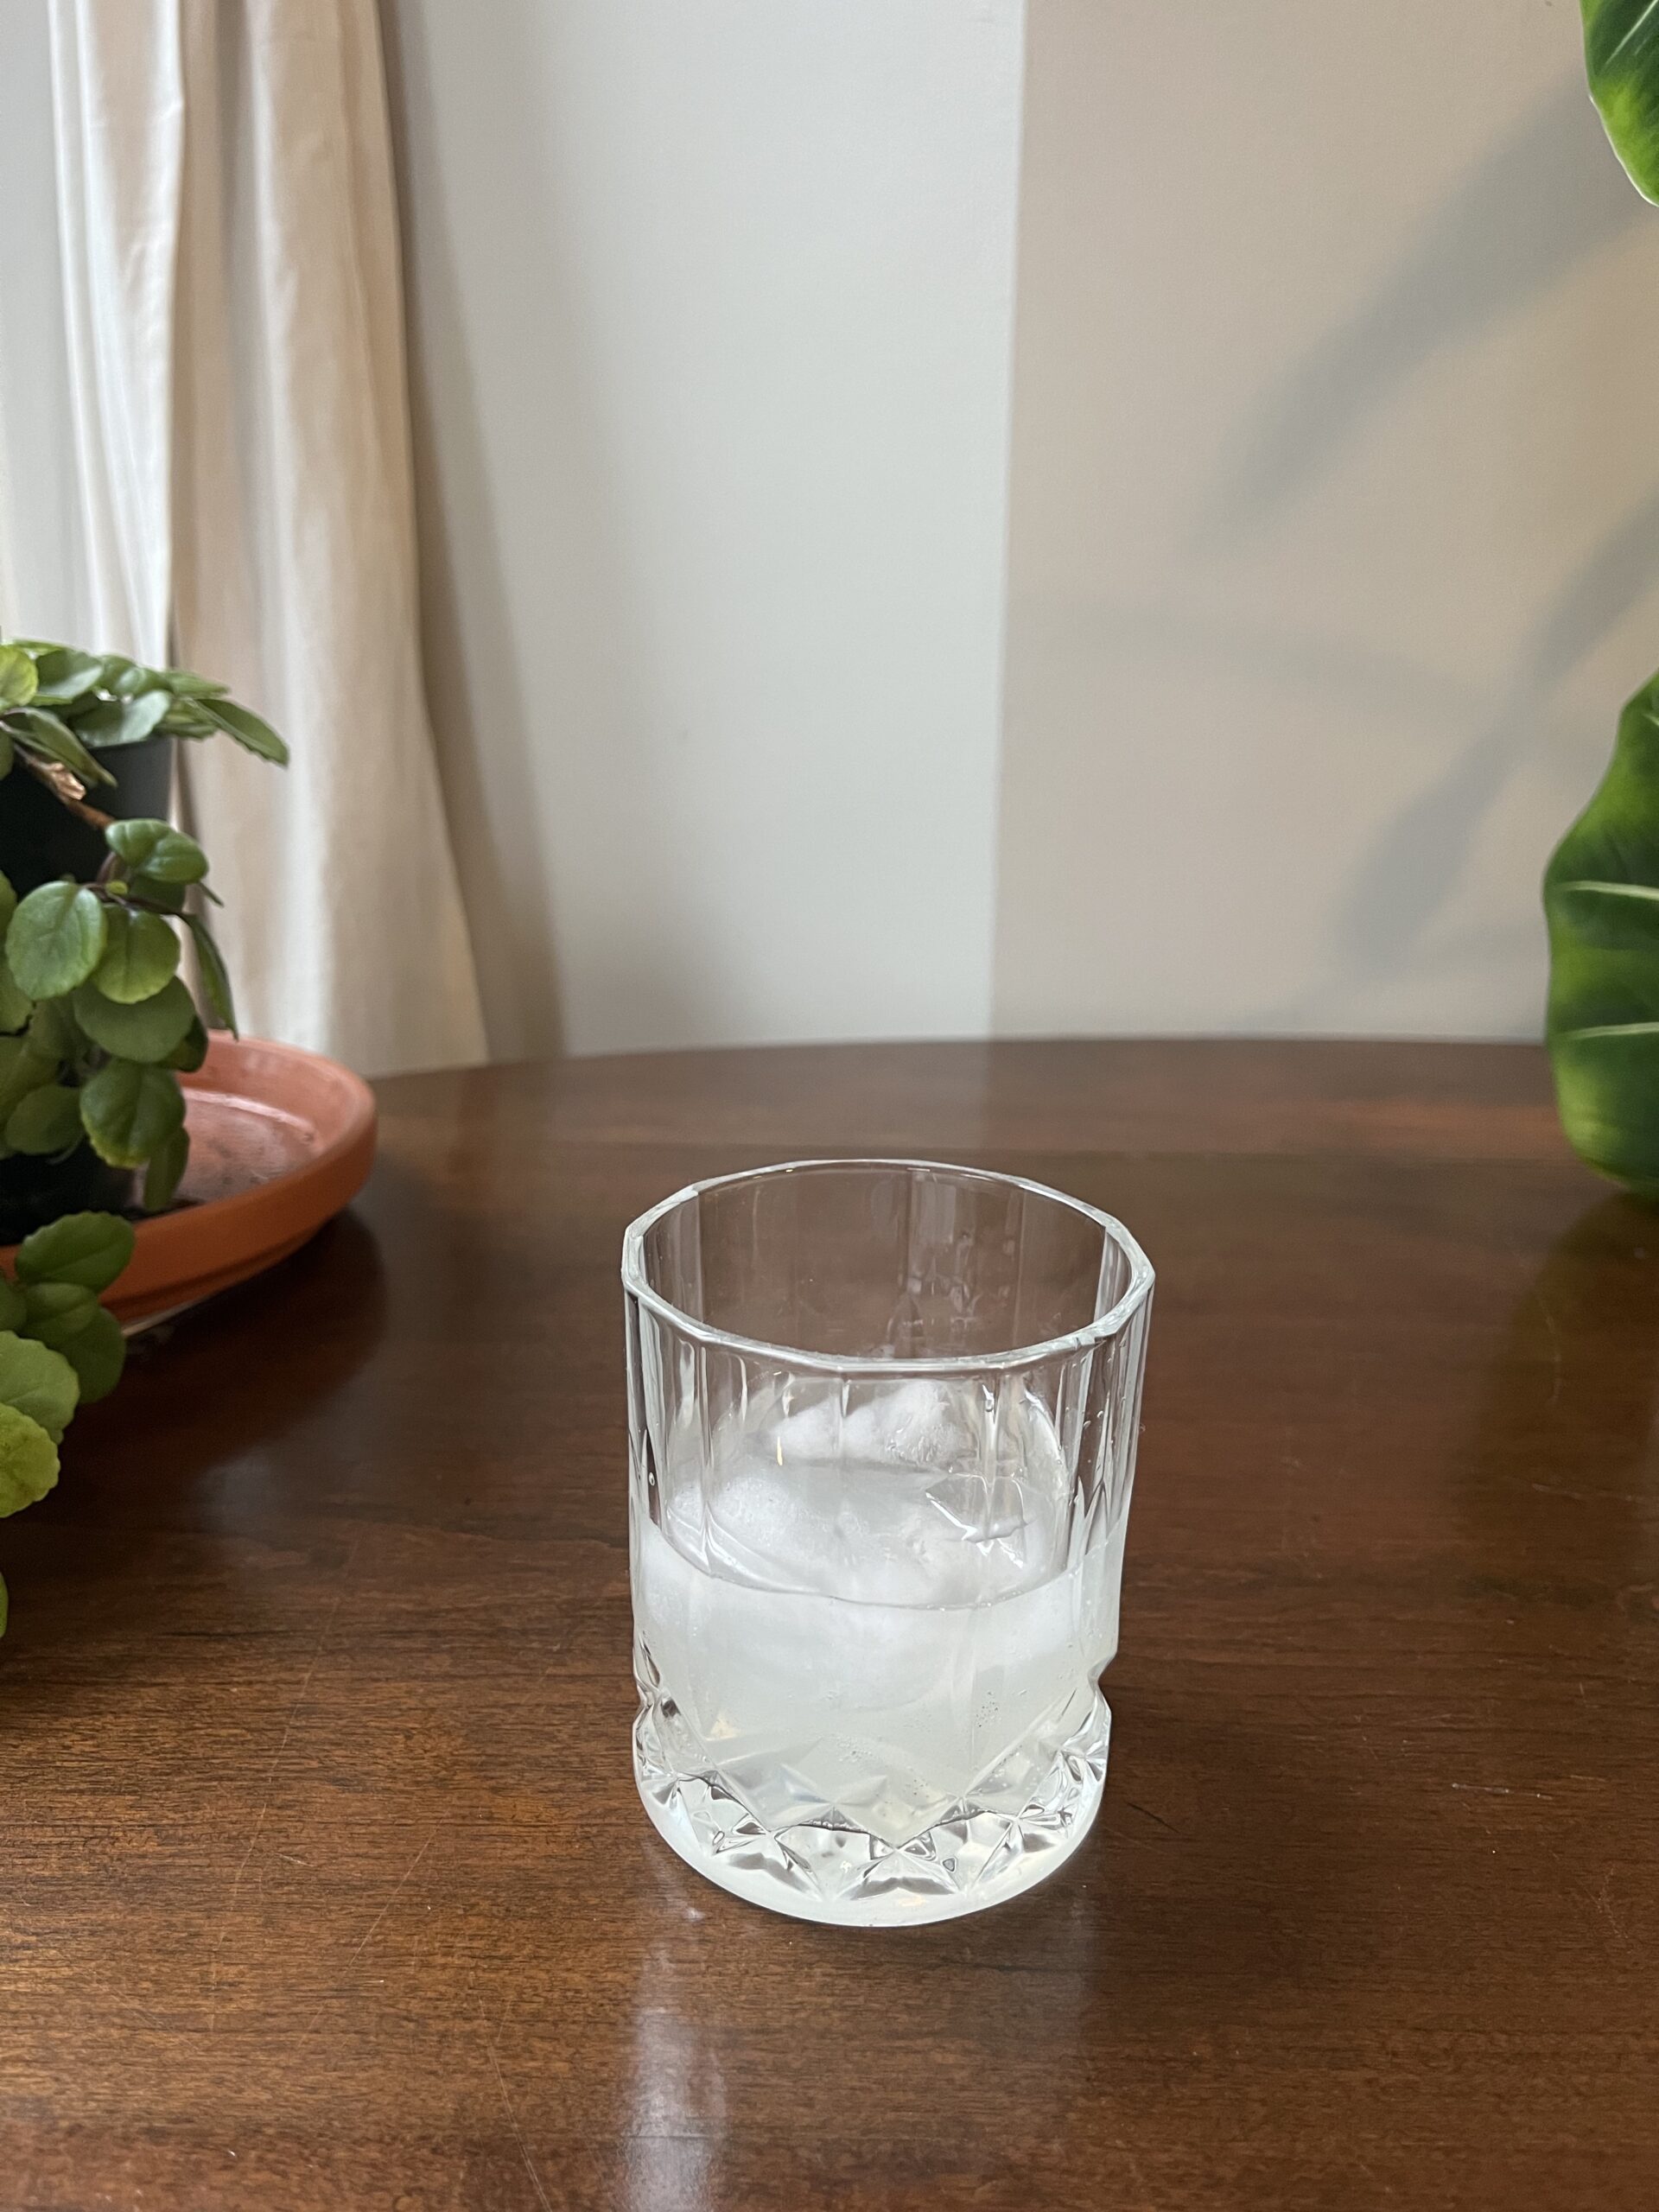 A clear glass with ice and a light-colored beverage sits on a wooden table next to a potted plant.